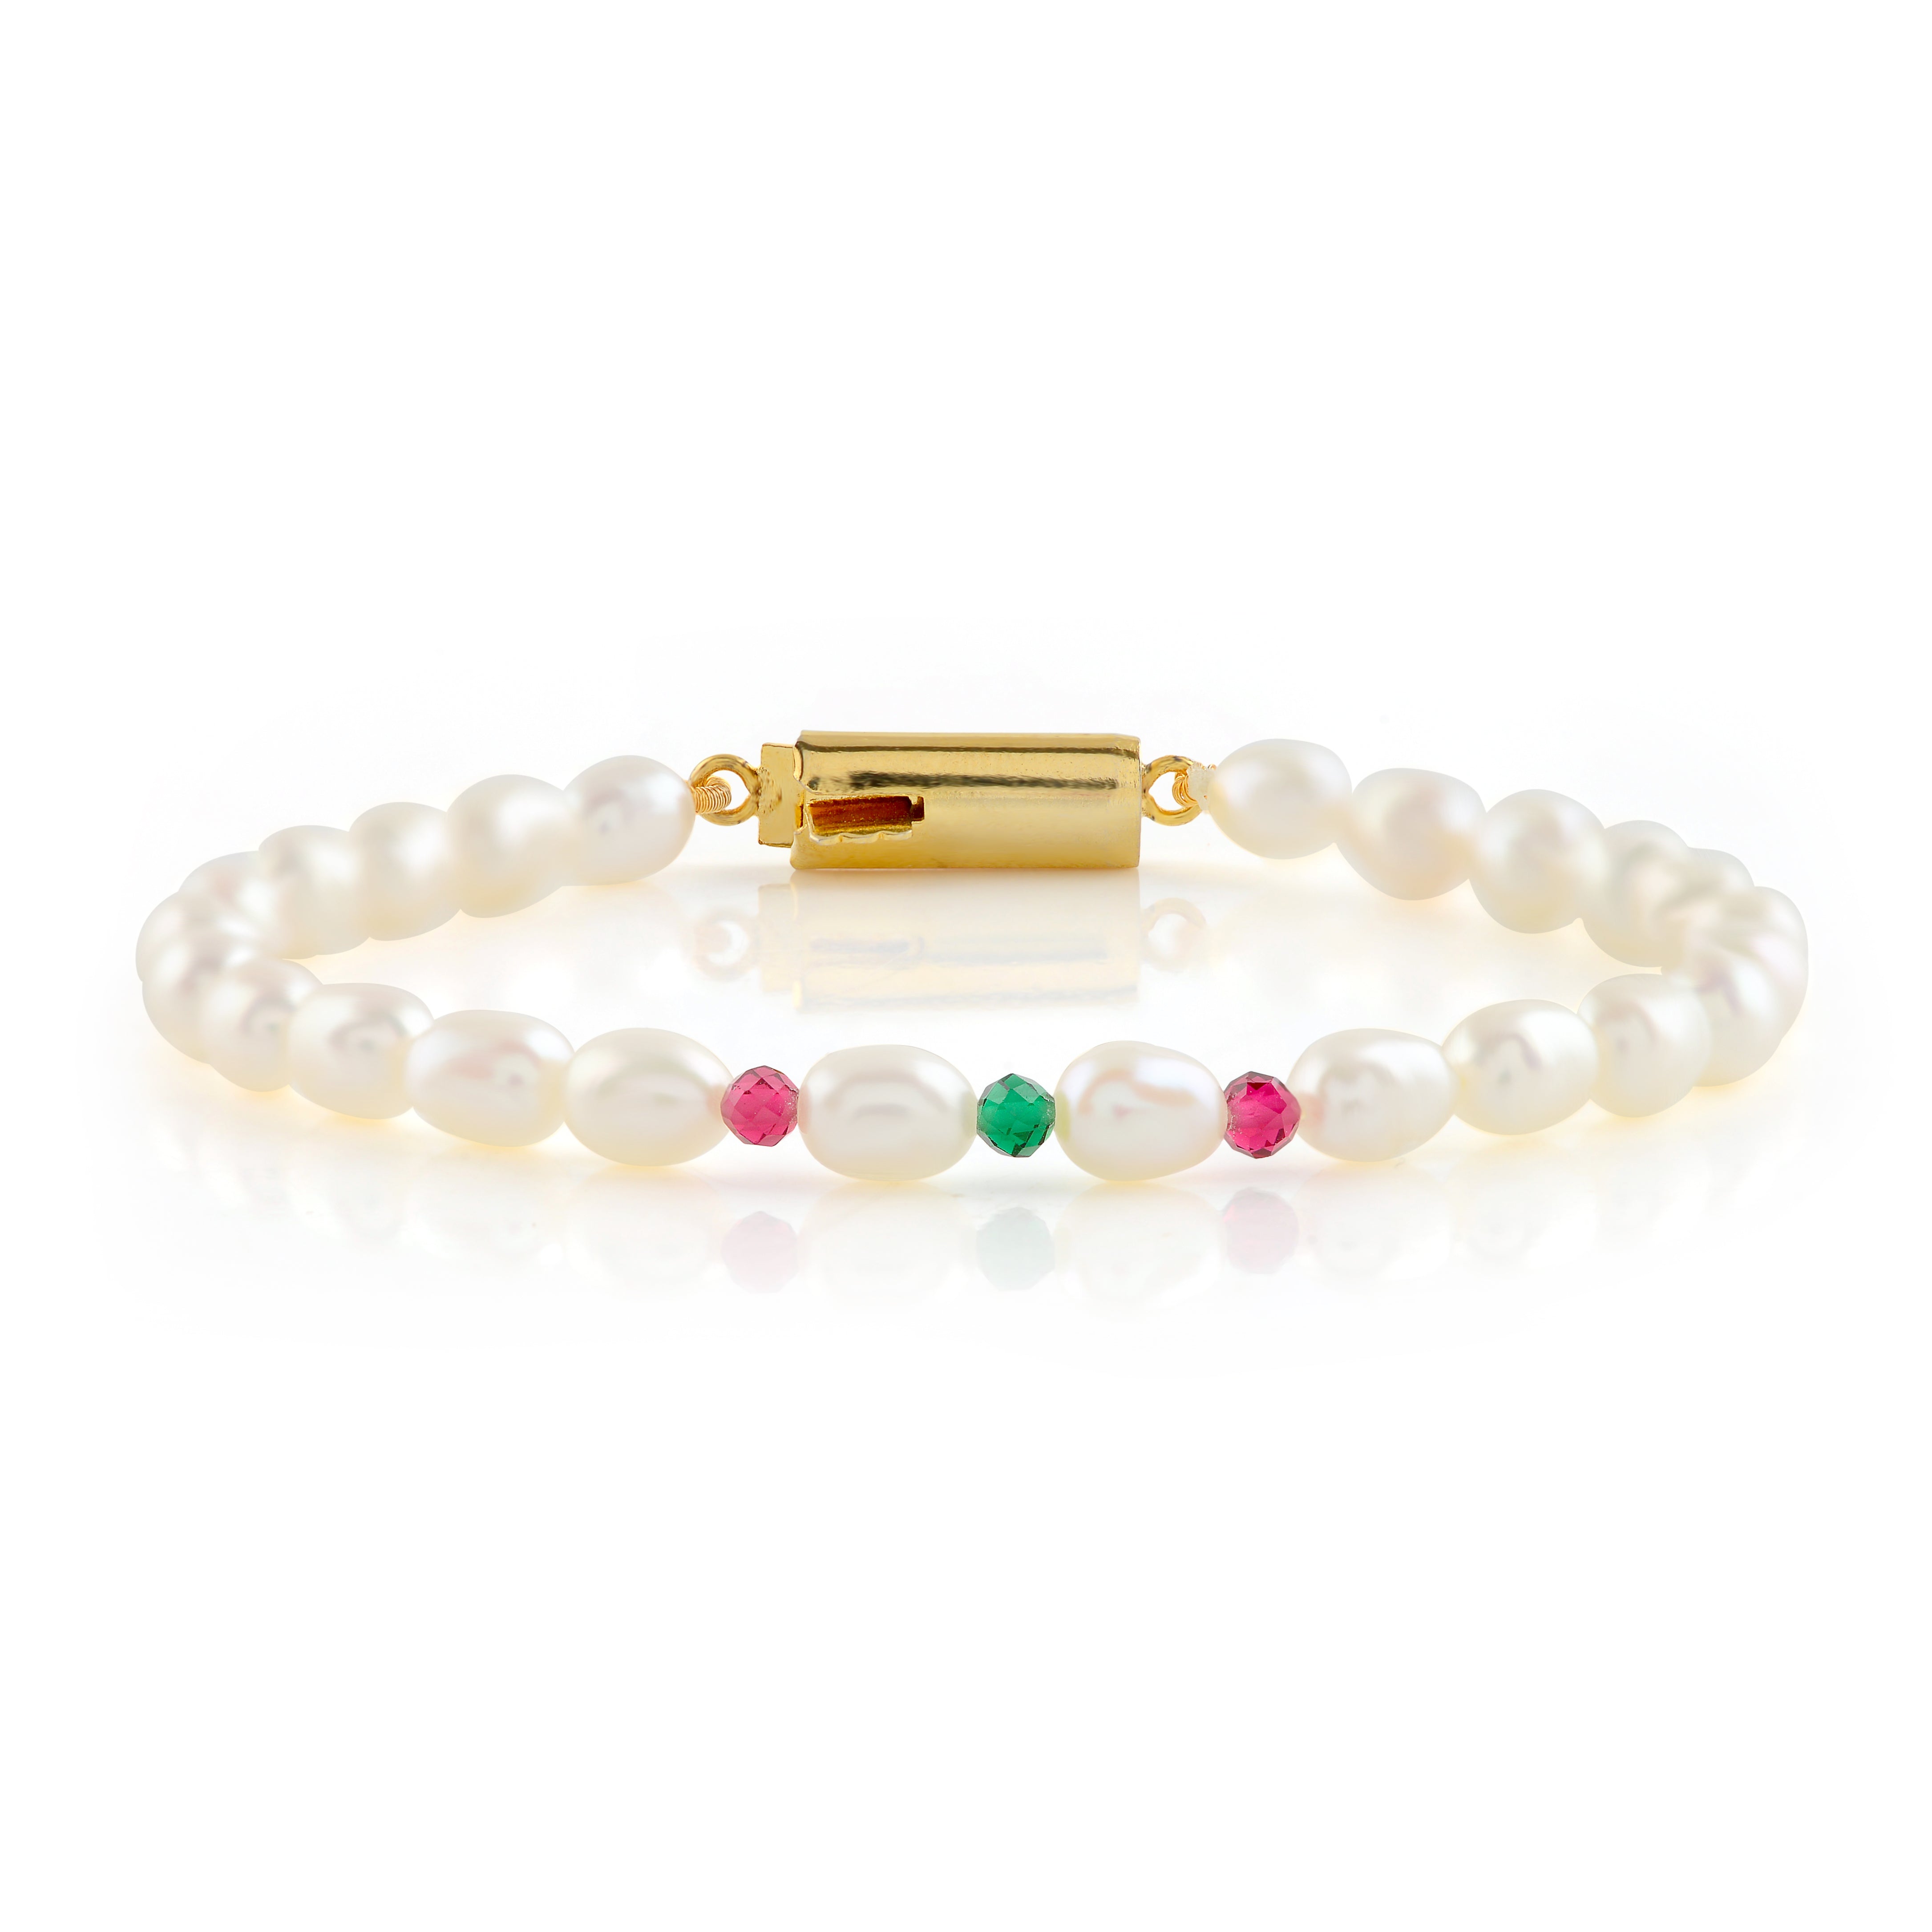 Colorful Gemstone Bracelet with One Strand of Freshwater Rice Pearls